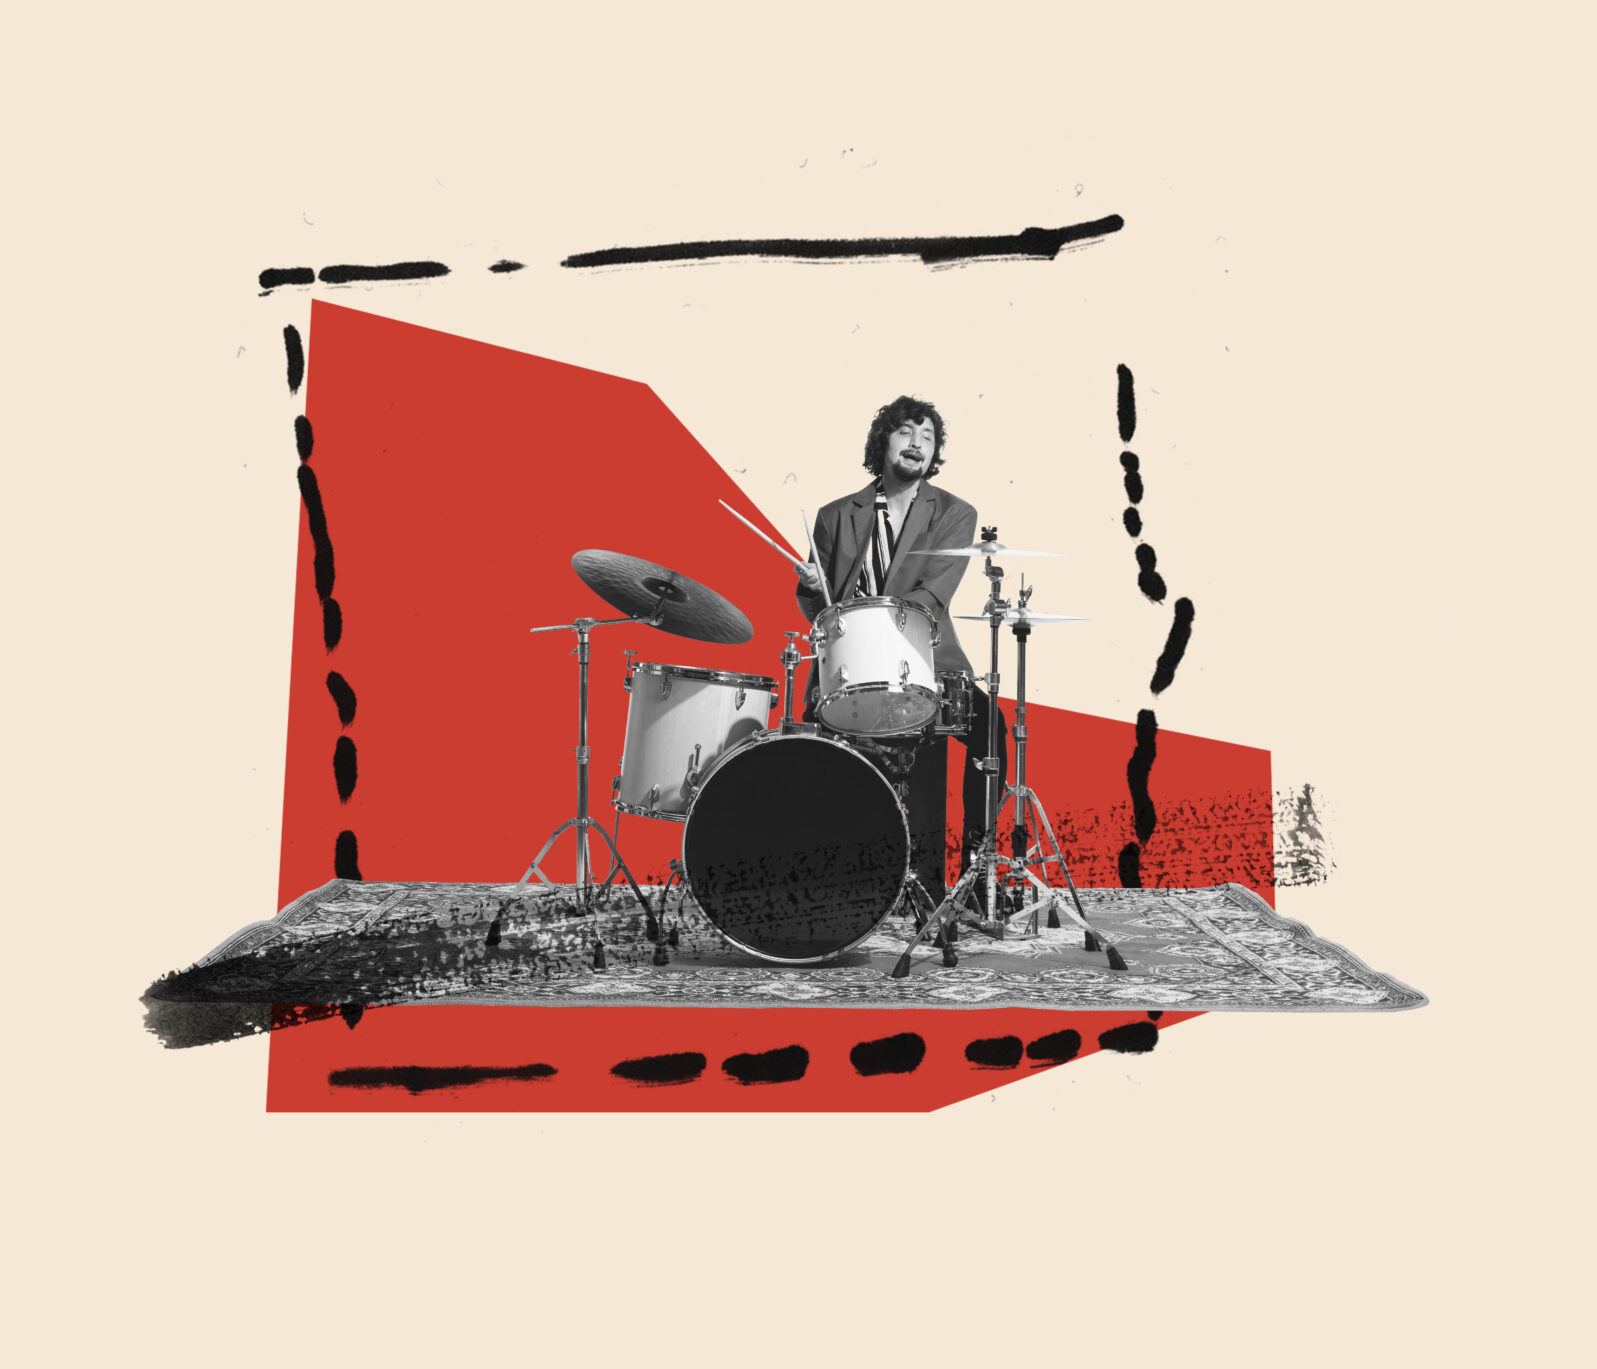 Modern creative artwork, design. Contemporary art collage of young man playing drums isolated over colorful background. Concept of music lifestyle, jazz, rock, rock n roll, creativity, imagination